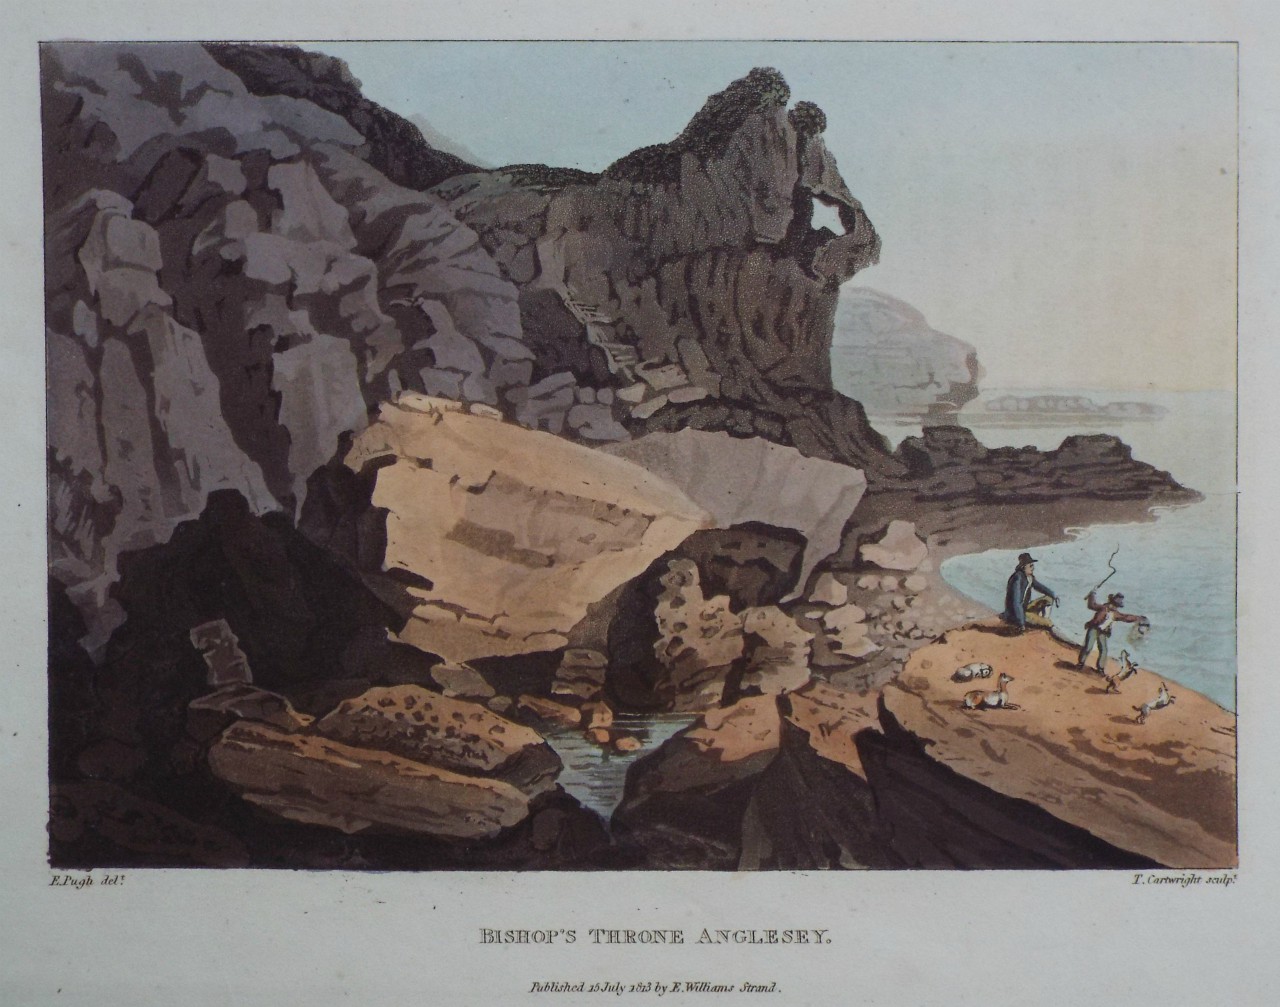 Aquatint - Bishops Throne, Anglesey. - Cartwright